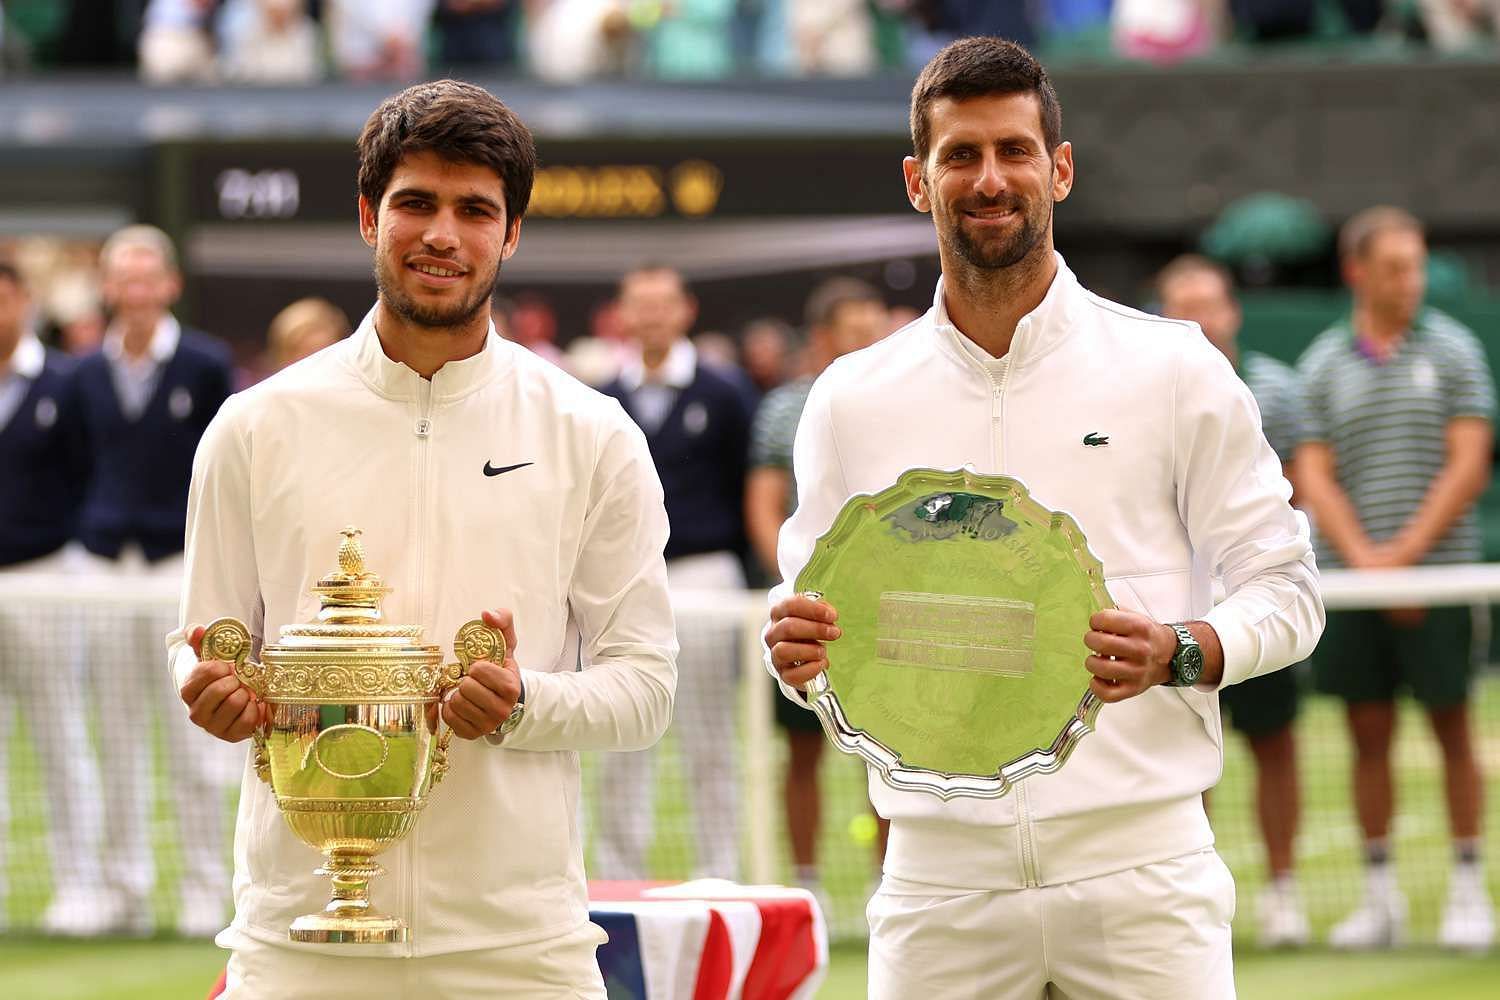 Novak Djokovic and Carlos Alcaraz will be potentially resuming their rivalry at the 2023 Davis Cup